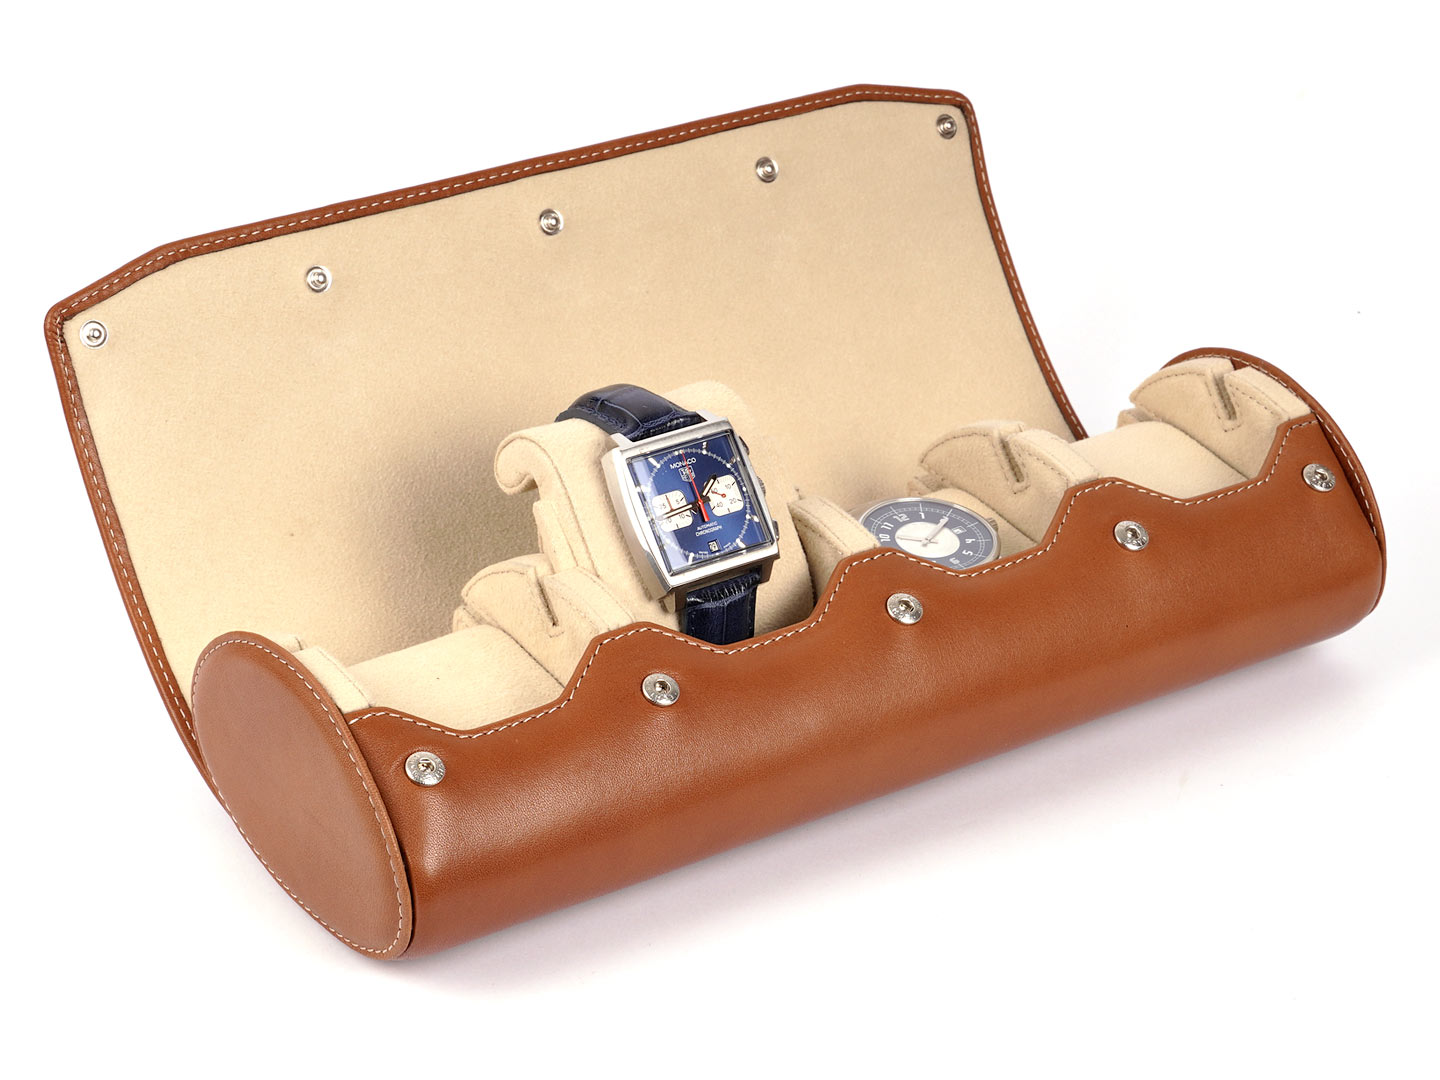 4-watches_organiser_display_travel_roll_cognac-leather-Carapaz